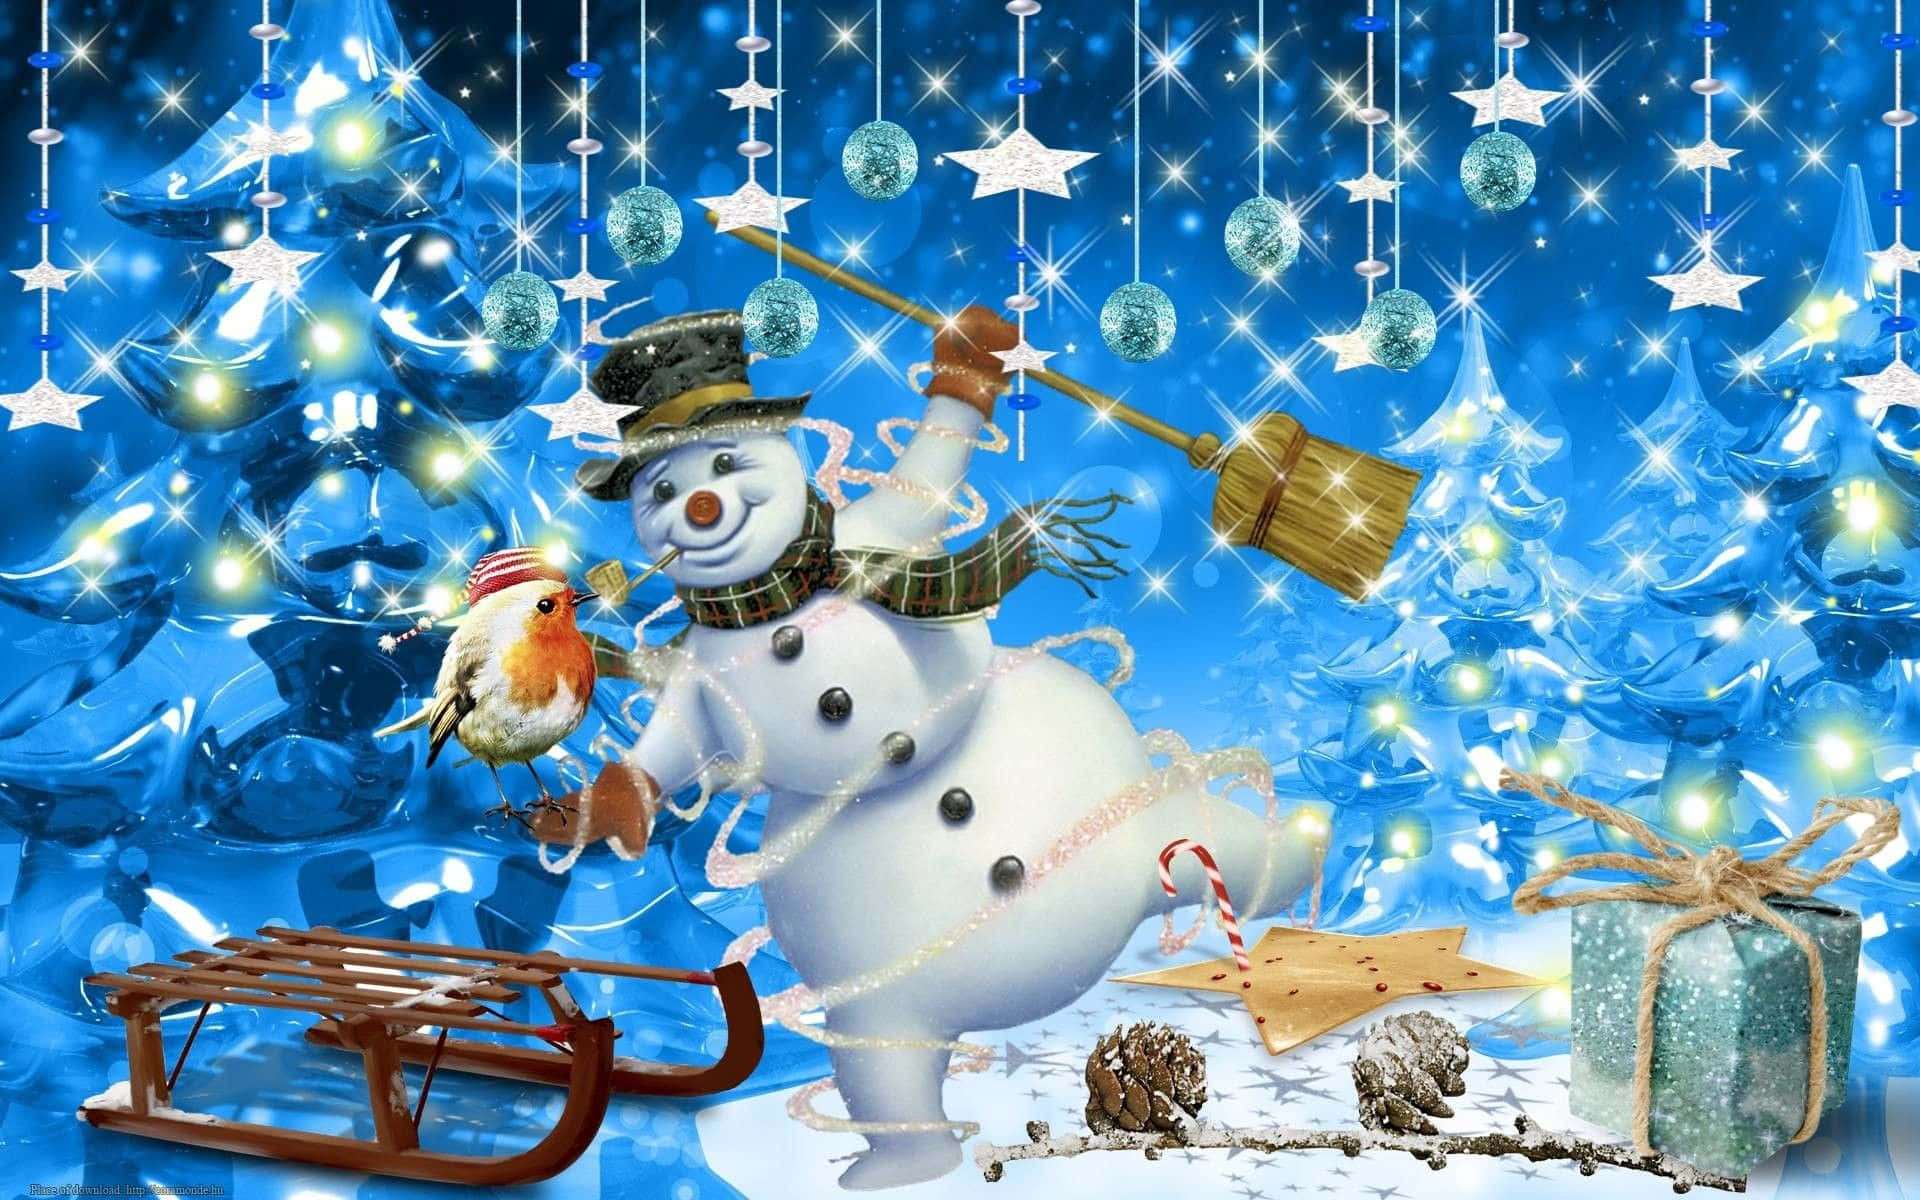 "Christmas snowman cheers and welcomes a magical winter season!" Wallpaper